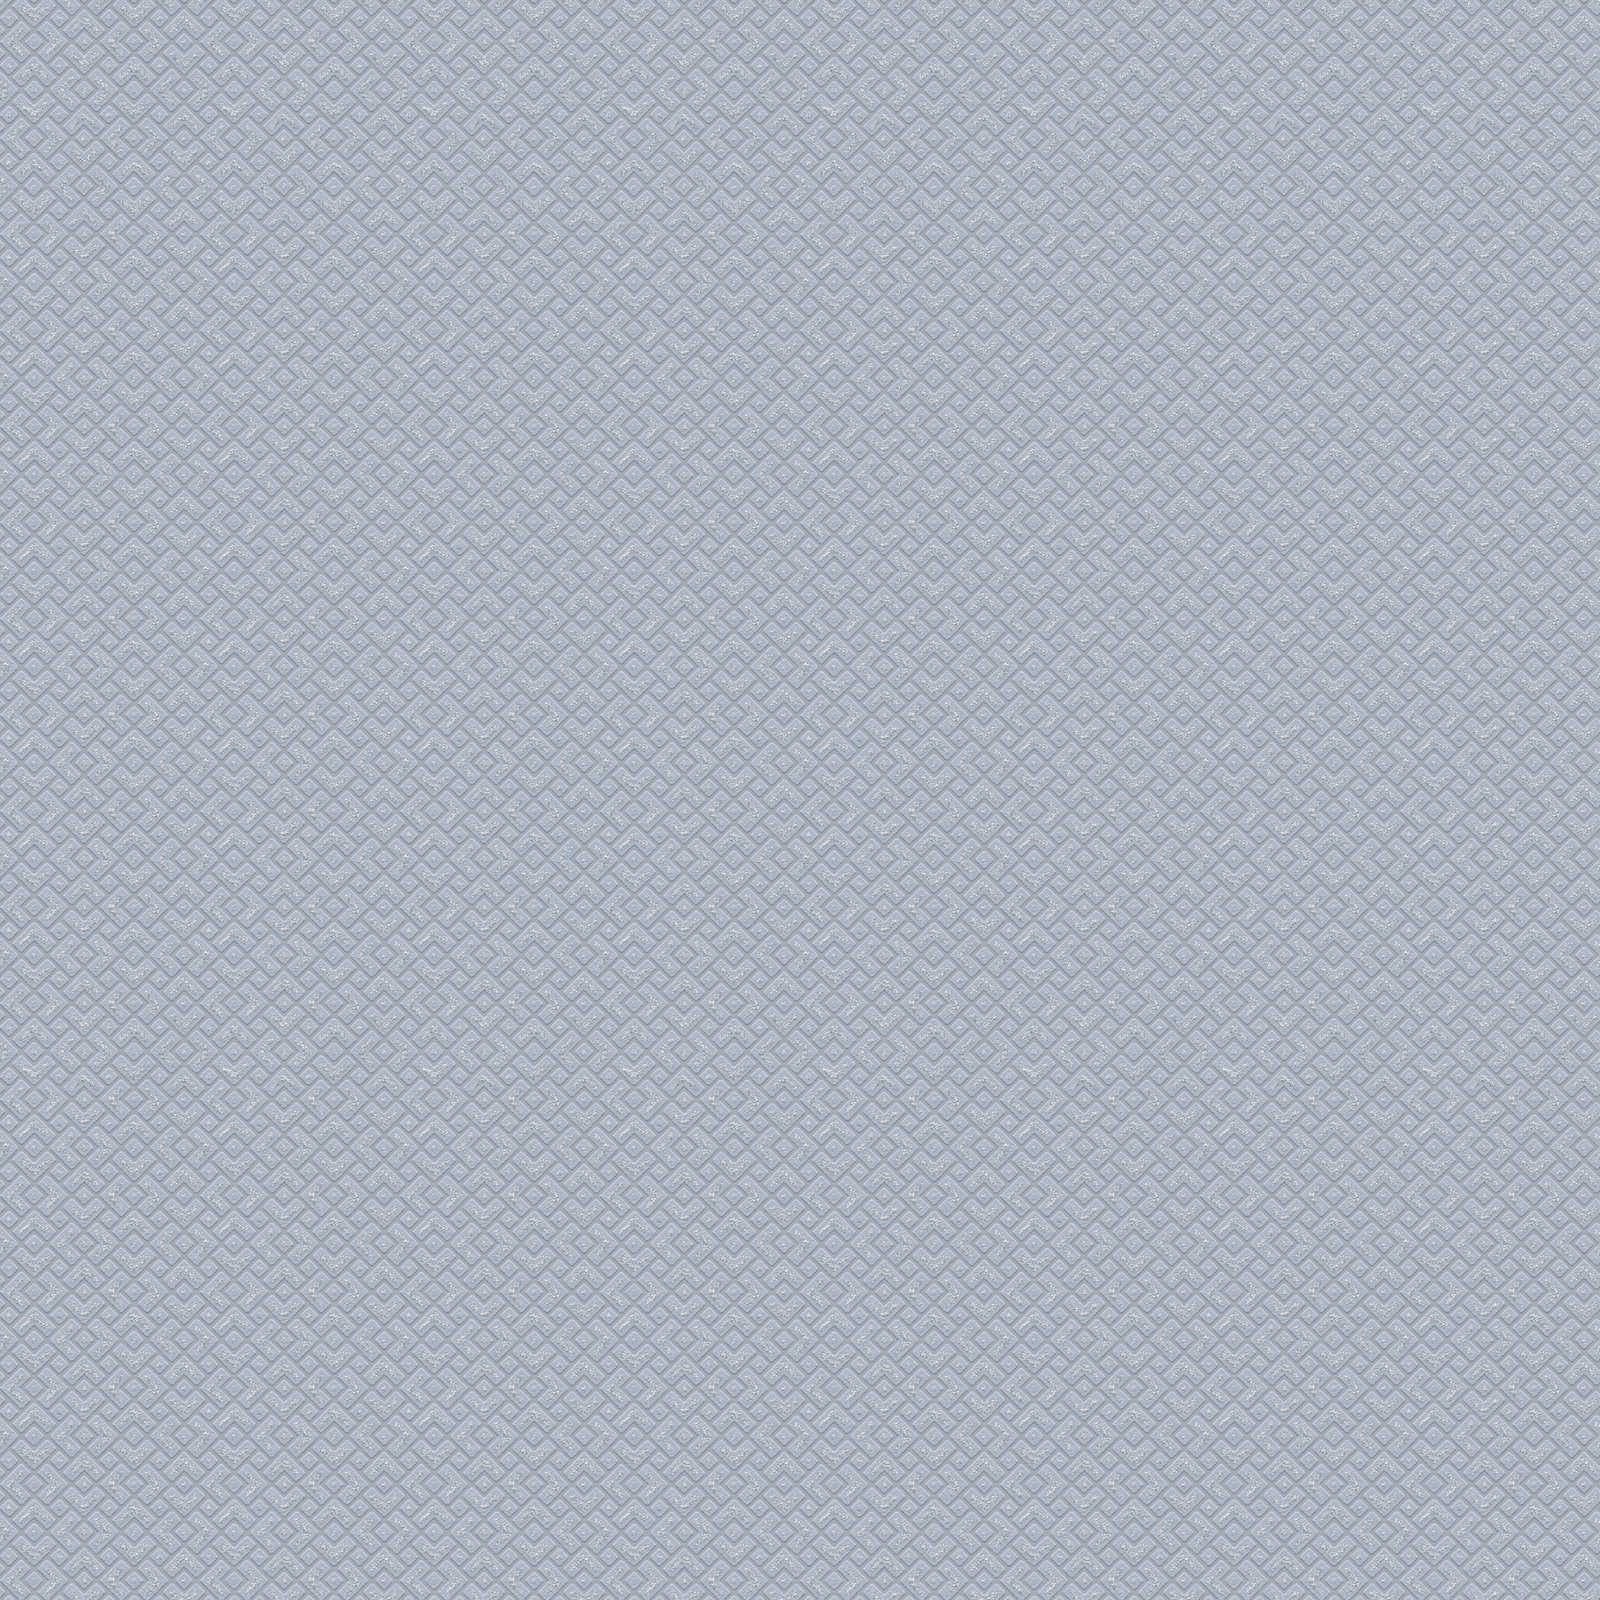 Wallpaper tone-on-tone pattern & silver accent - blue
